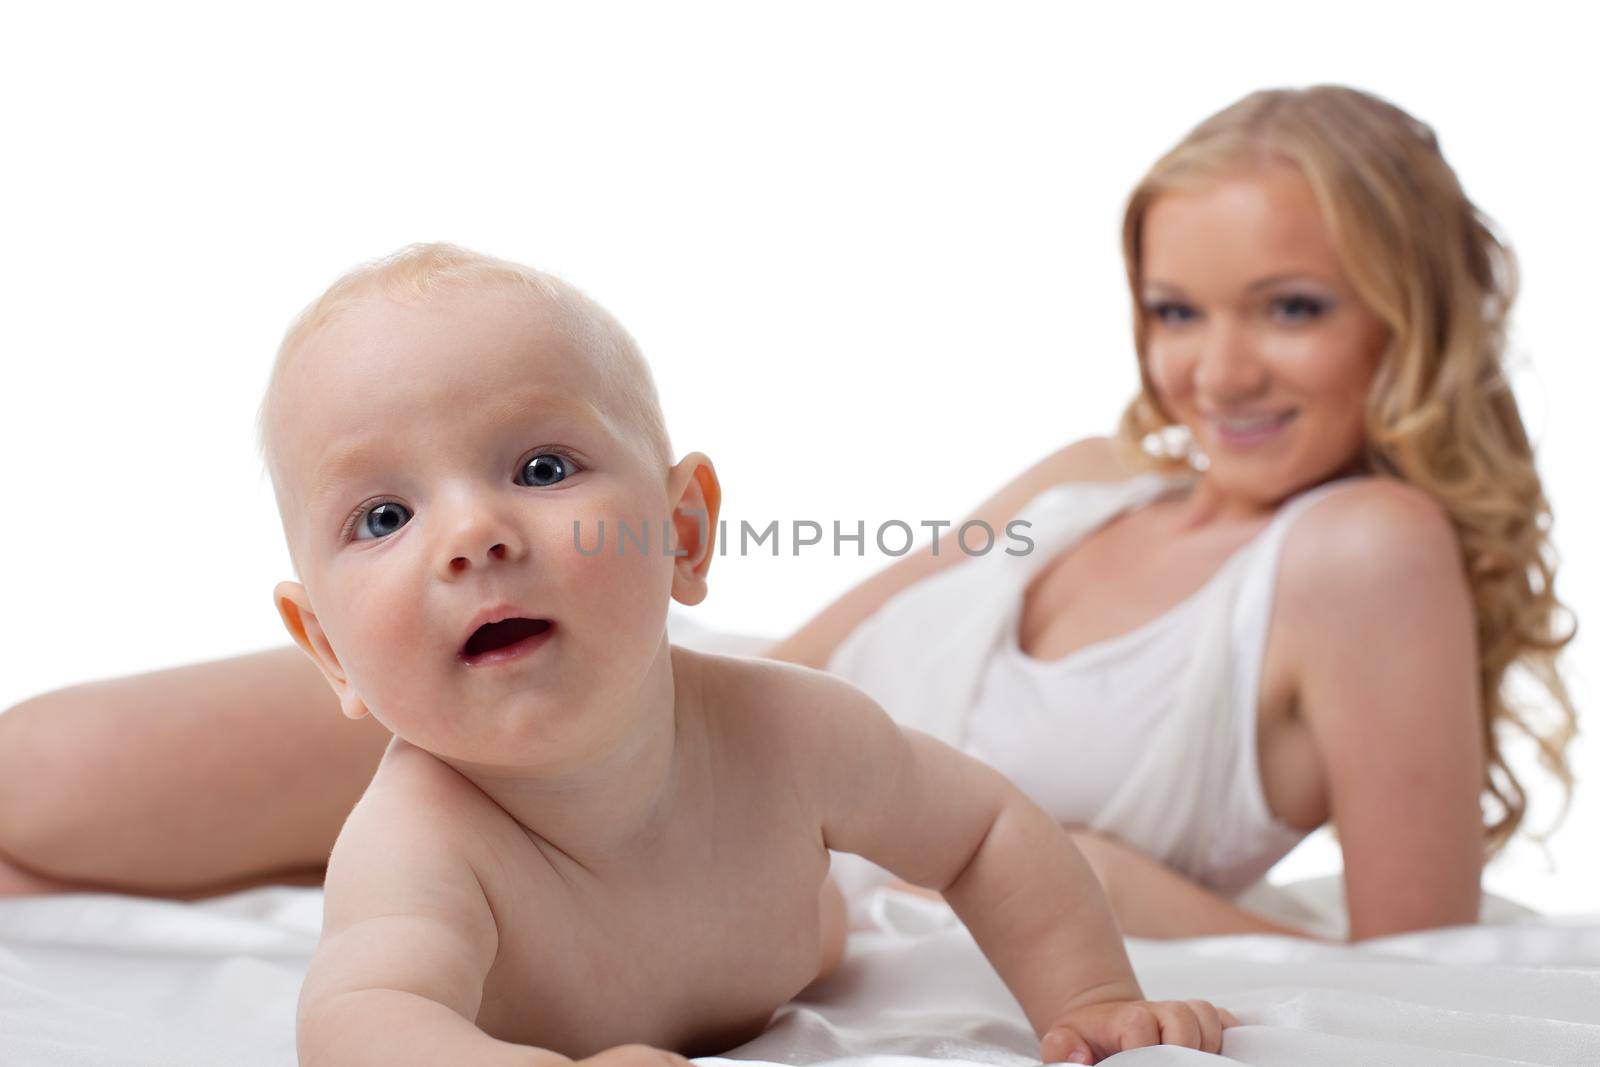 Amazing baby and Pretty woman on background